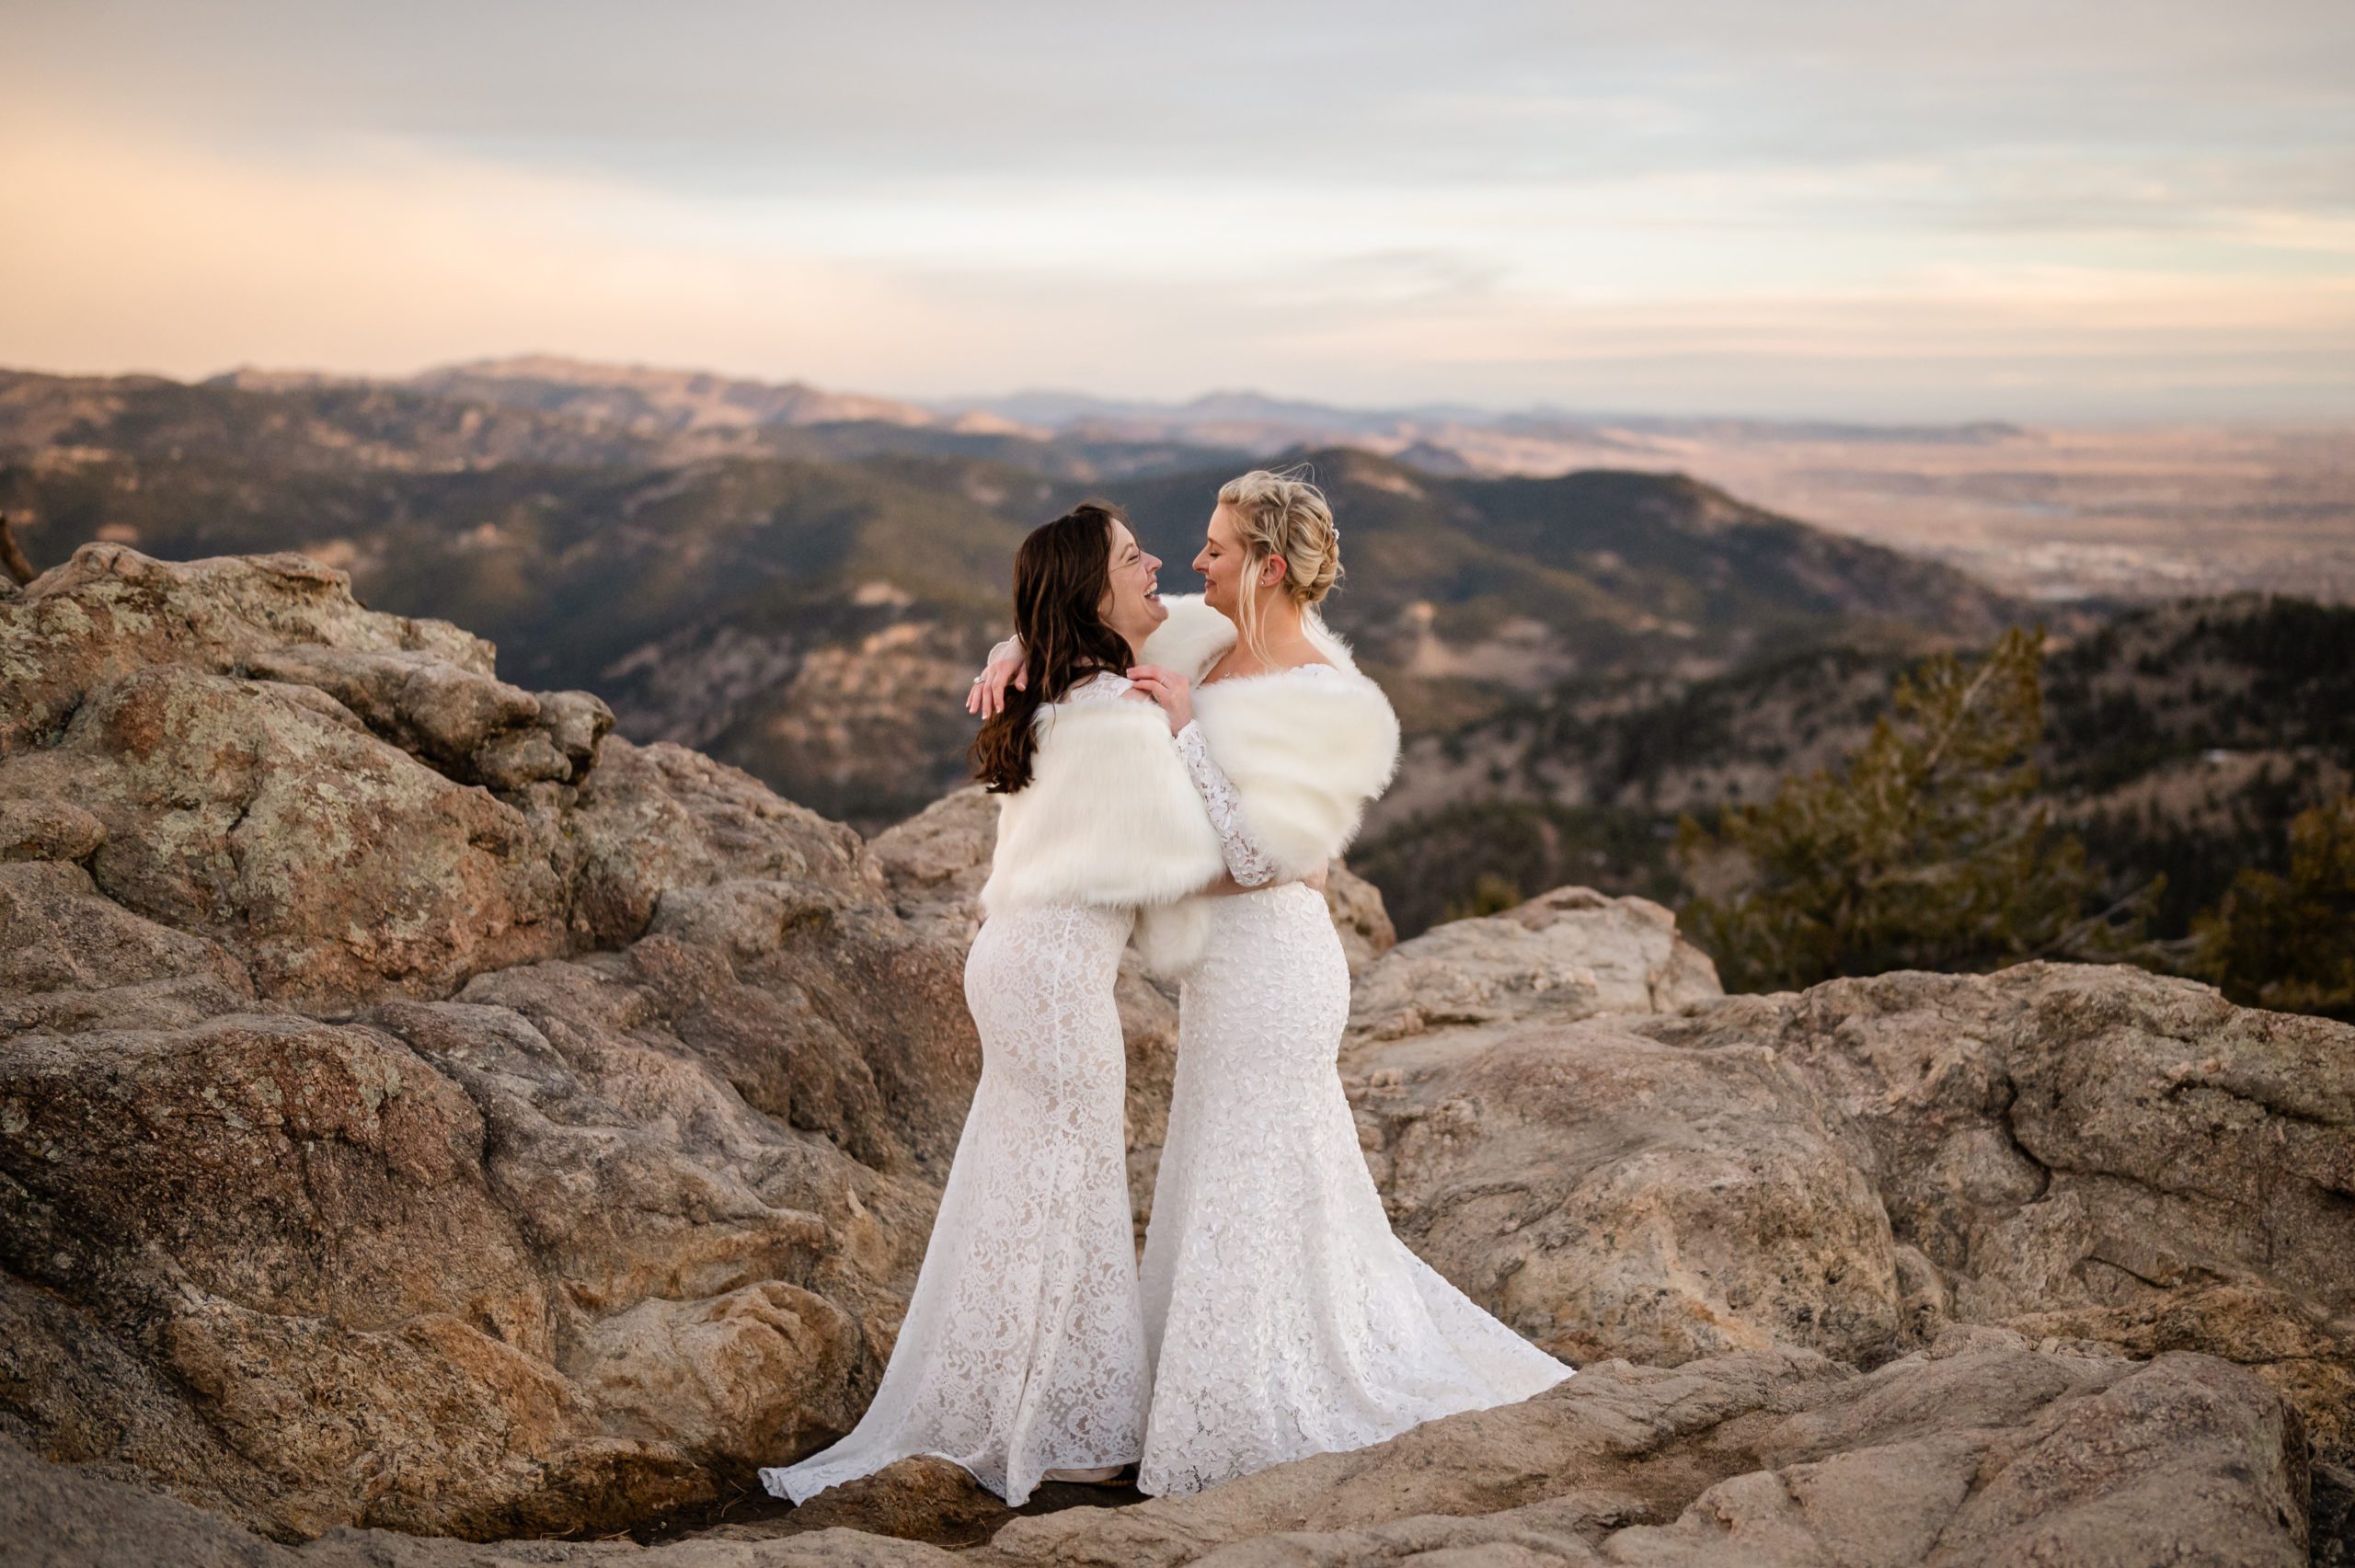 The brides smiling and laughing together during their Lost Gulch elopement ceremony. 